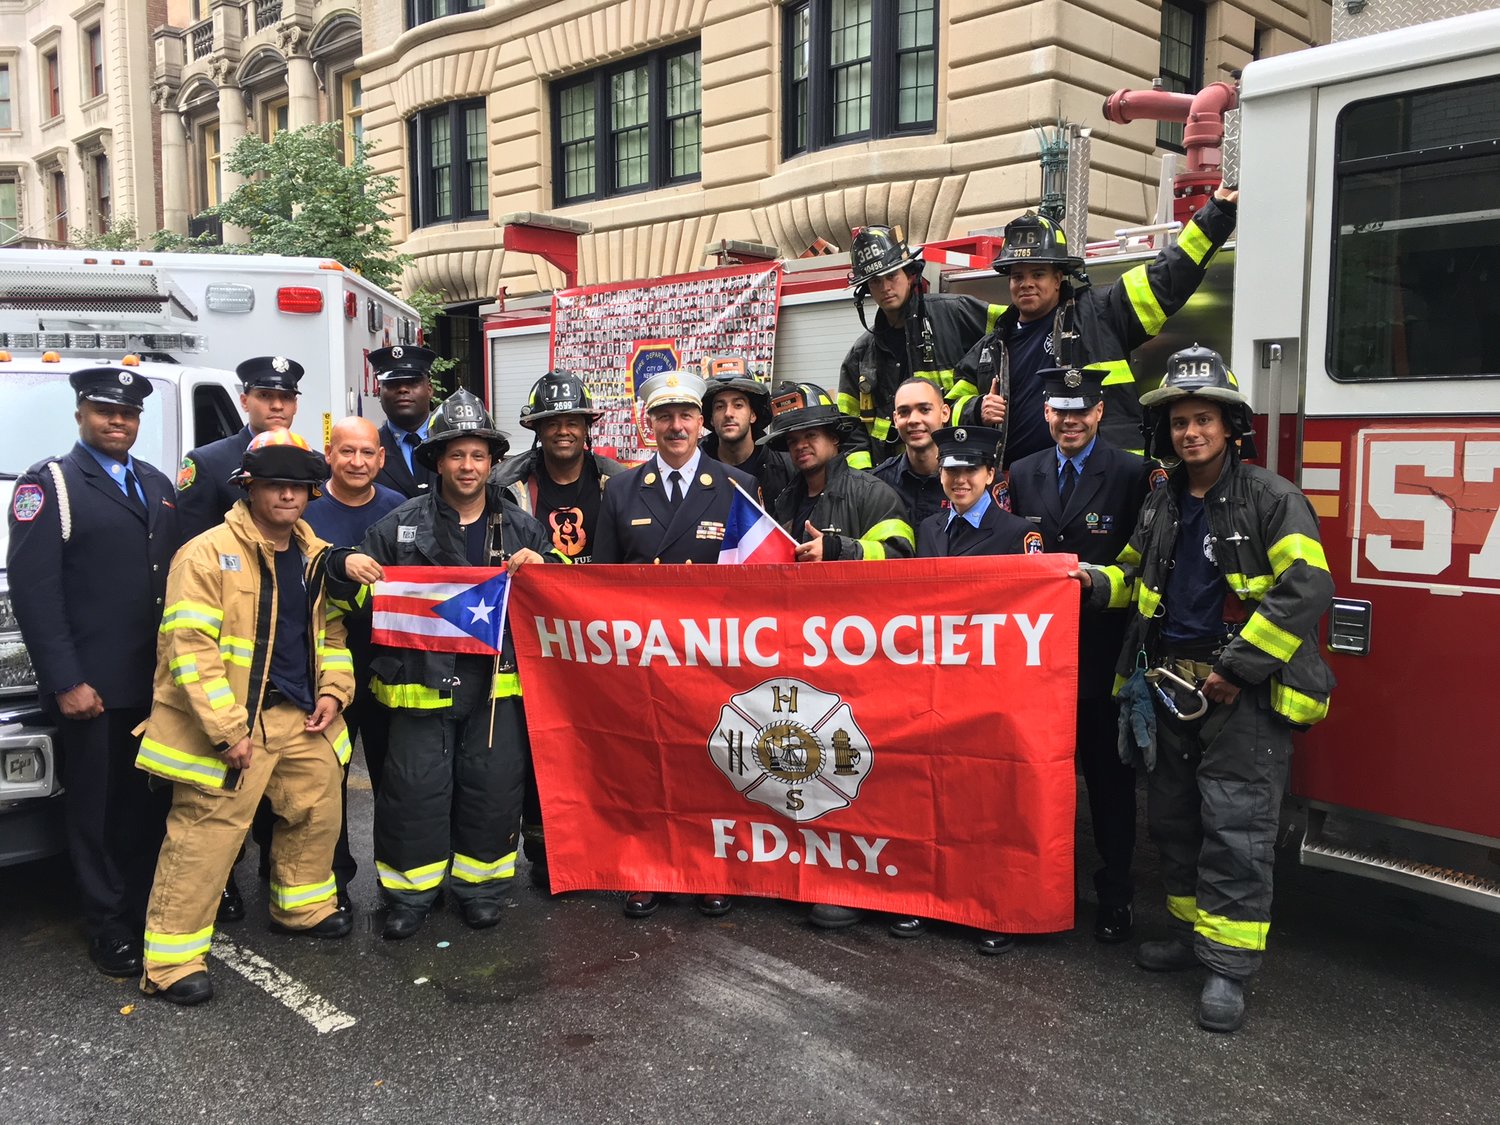 Members of the FDNY’s Hispanic Society during the 2017 annual Hispanic Day Parade along Fifth Avenue. The society’s president, Jose Prosper, at left, holding the Puerto Rican flag, recently said he does not sanction a threatened suit by the National Association of Hispanic Firefighters against the FDNY that alleges insufficient progress on diversity efforts.